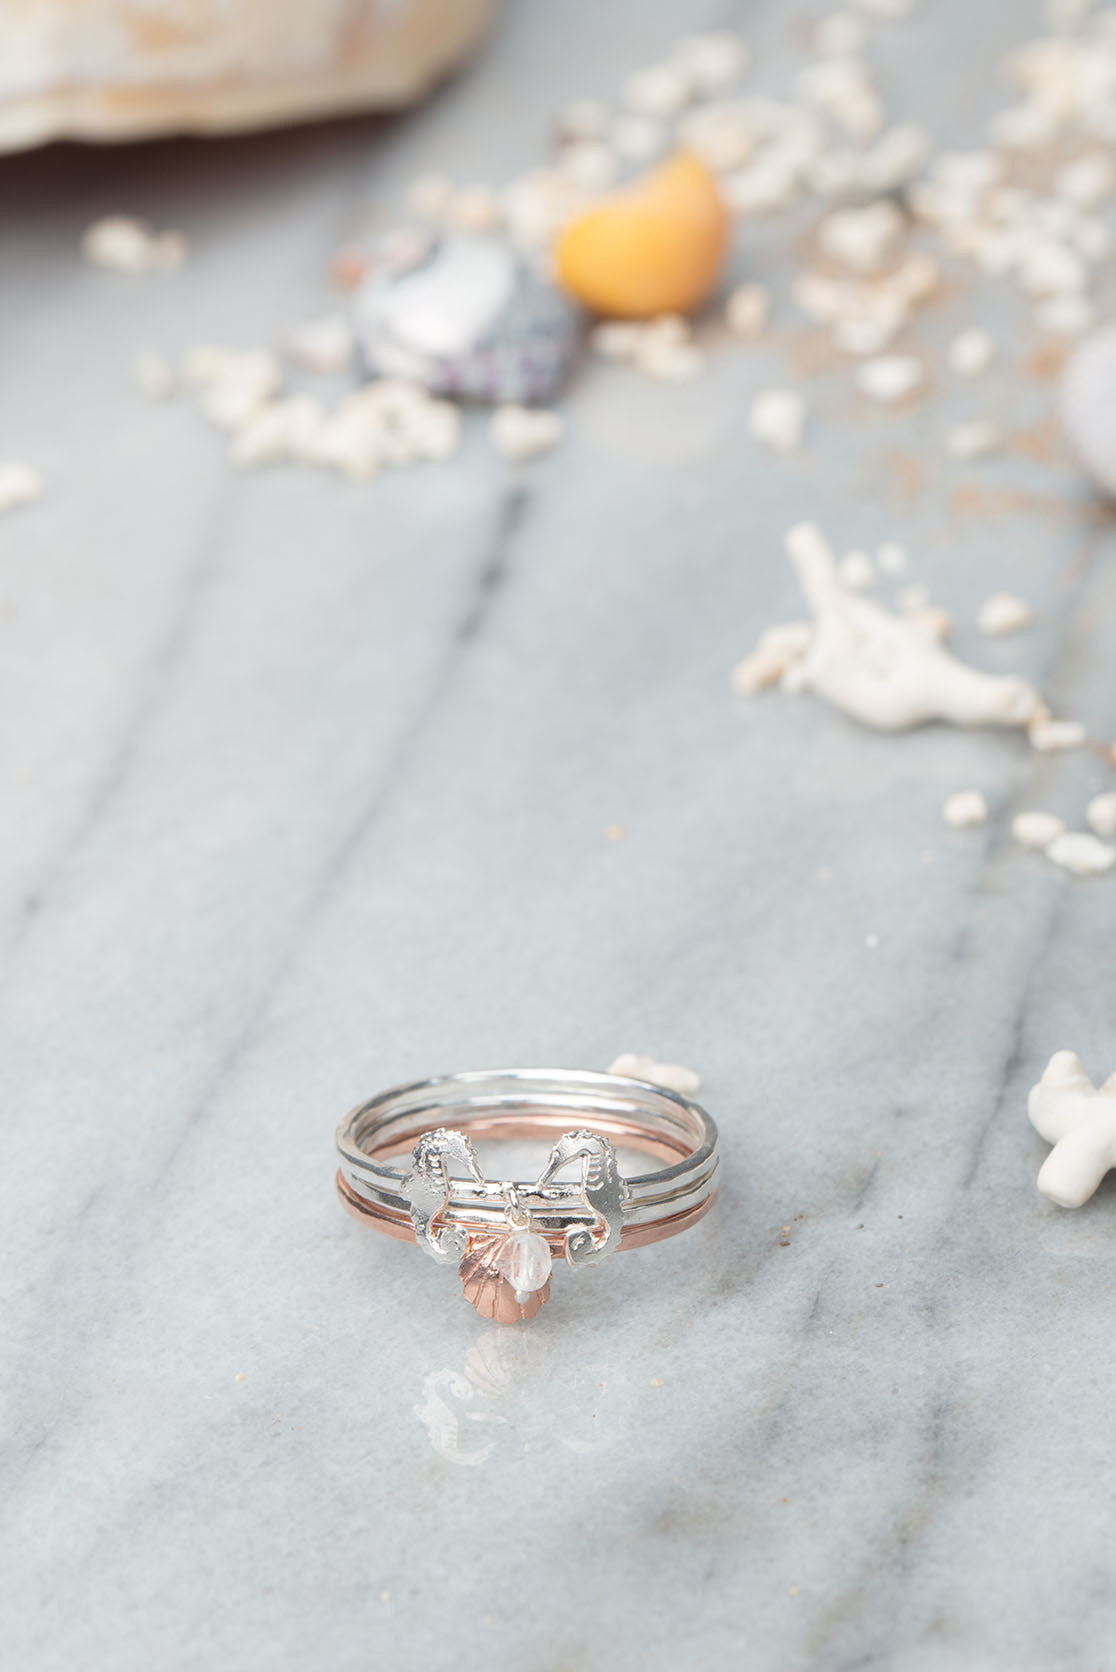 Silver and rose gold sea creature ring